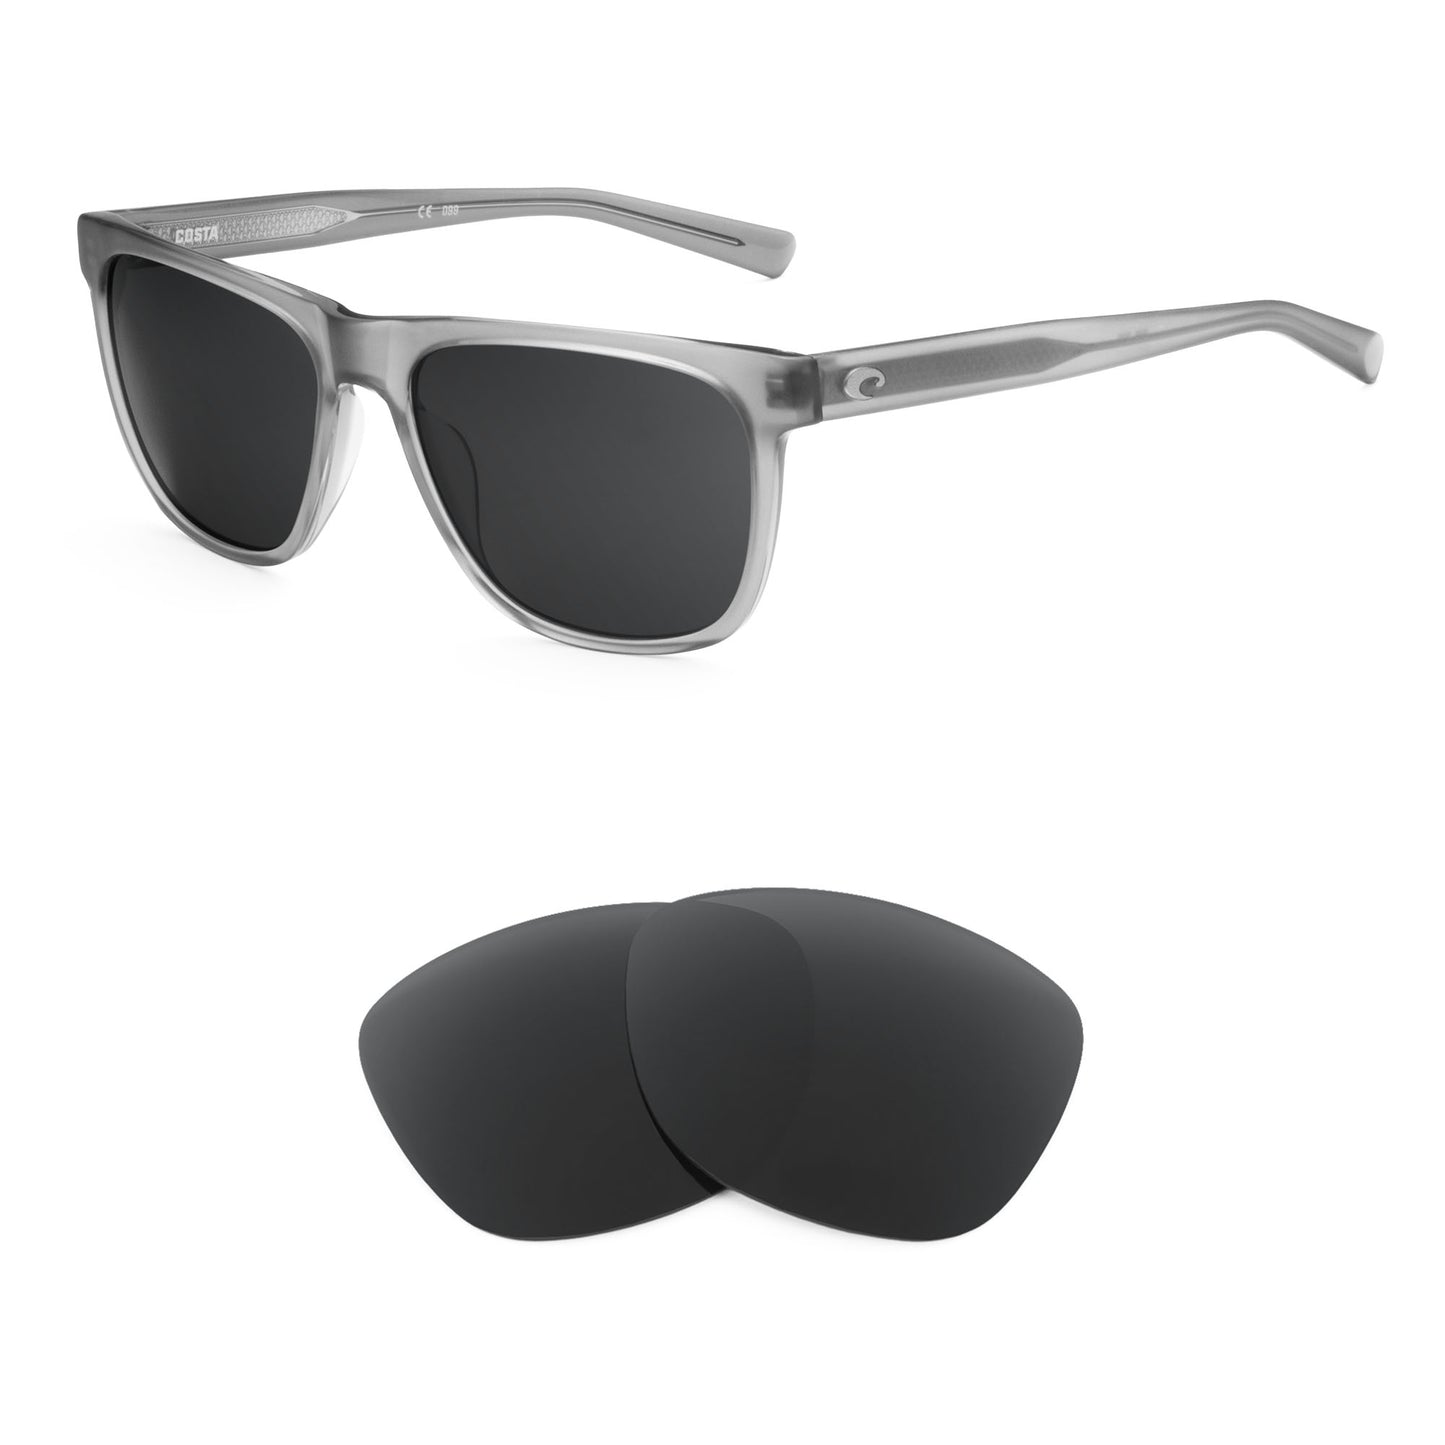 Costa Apalach sunglasses with replacement lenses